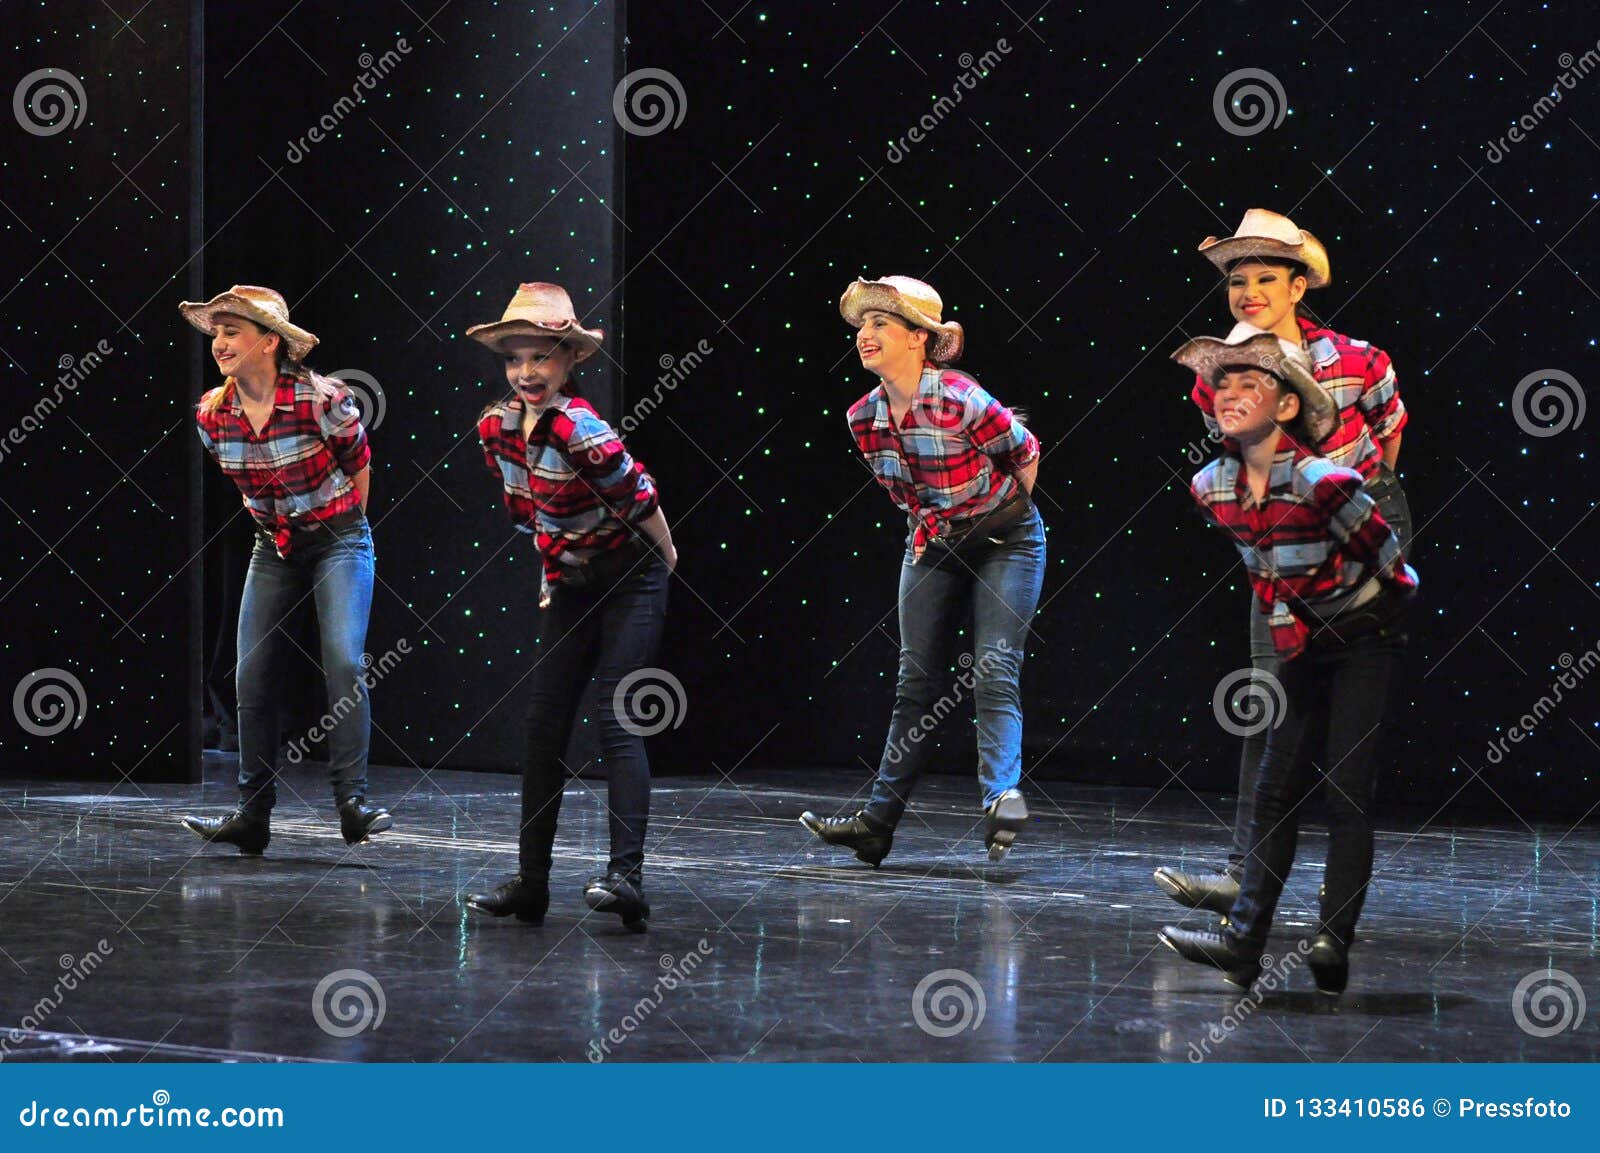 lesbian cowgirl dancing to contry music hd pic